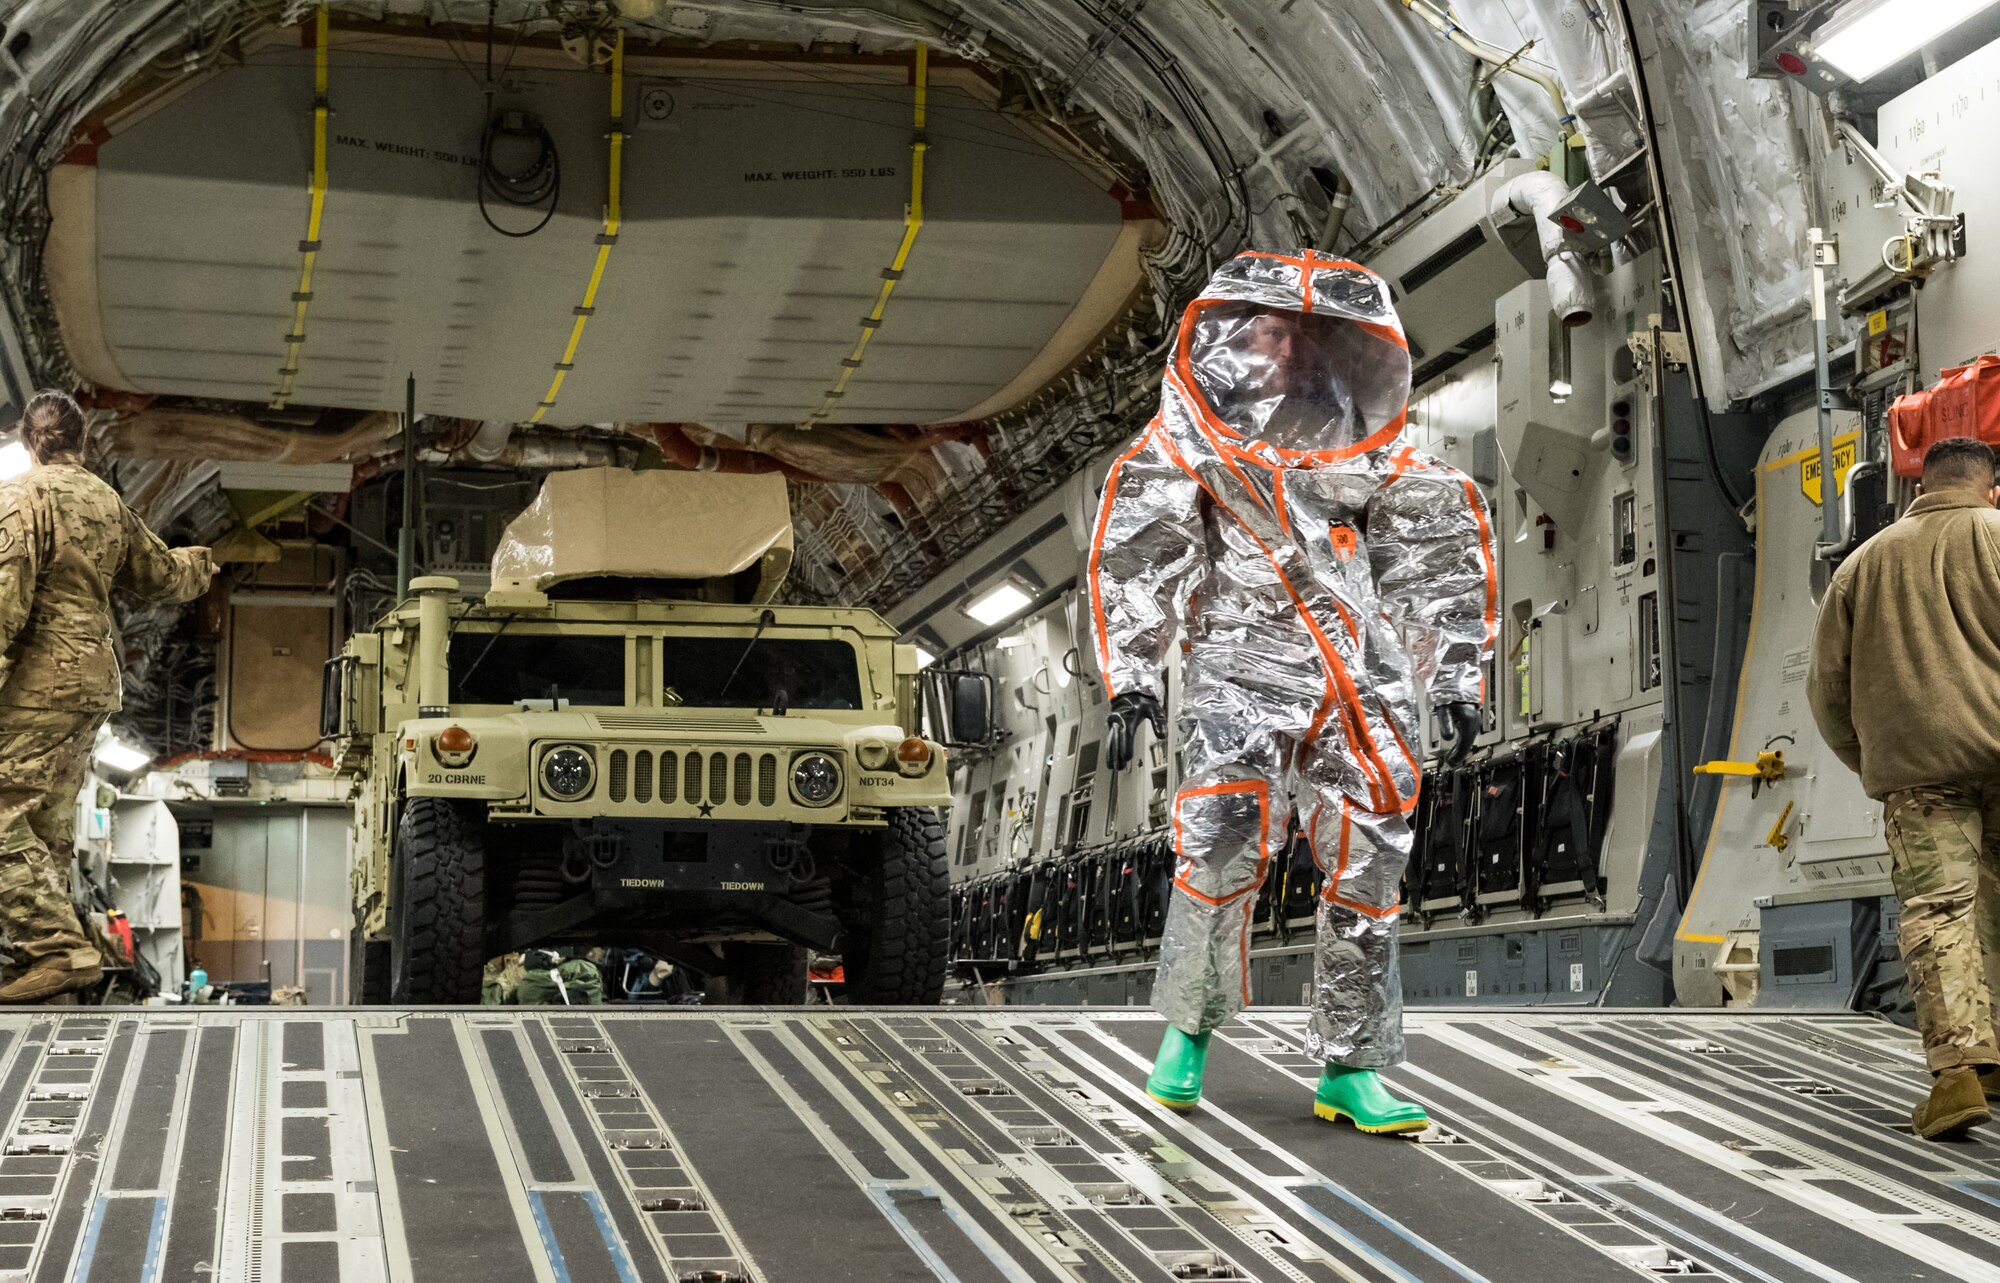 U.S. Army Maj. Mark Quint, 20th Chemical, Biological, Radiological, Nuclear and Explosives Command nuclear disablement team deputy chief, walks down the ramp of a C-17 Globemaster III, wearing personal protective equipment Sept. 19, 2020, at Dover Air Force Base, Delaware. The 20th CBRNE Command recently conducted a deployment readiness exercise, which consisted of several inspections, aerial troop movements and convoys. The 20th CBRNE Command ensures the effective countering of CBRNE hazards at home and abroad. Dover AFB serves as the primary port of embark for the 20th CBRNE Command during both exercises and operations and regularly supports similar joint missions. (U.S. Air Force photo by Roland Balik)